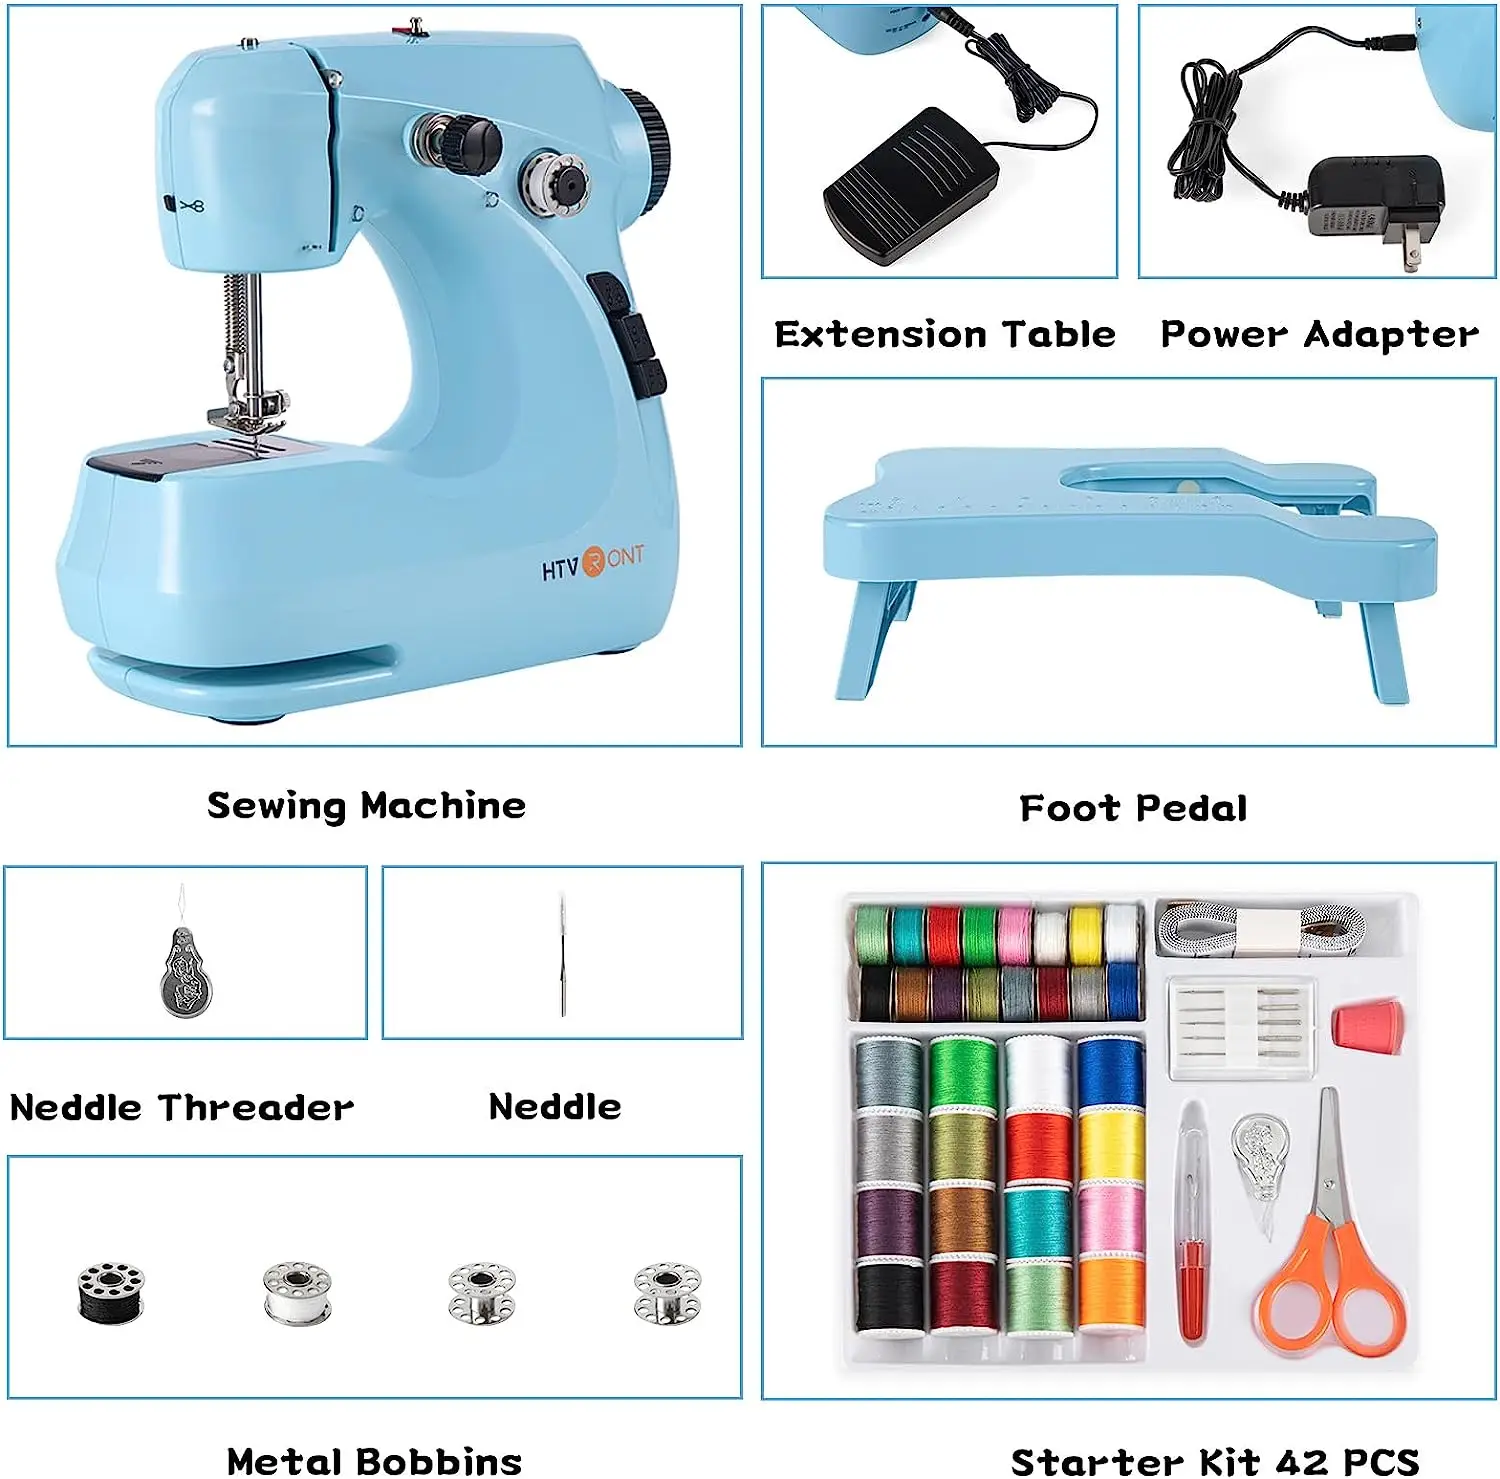 Mini Sewing Machine Electric Portable Sewing Machine Dual Speed Double  Thread for DIY Crafting (A,Without Extended Table, US Plug)